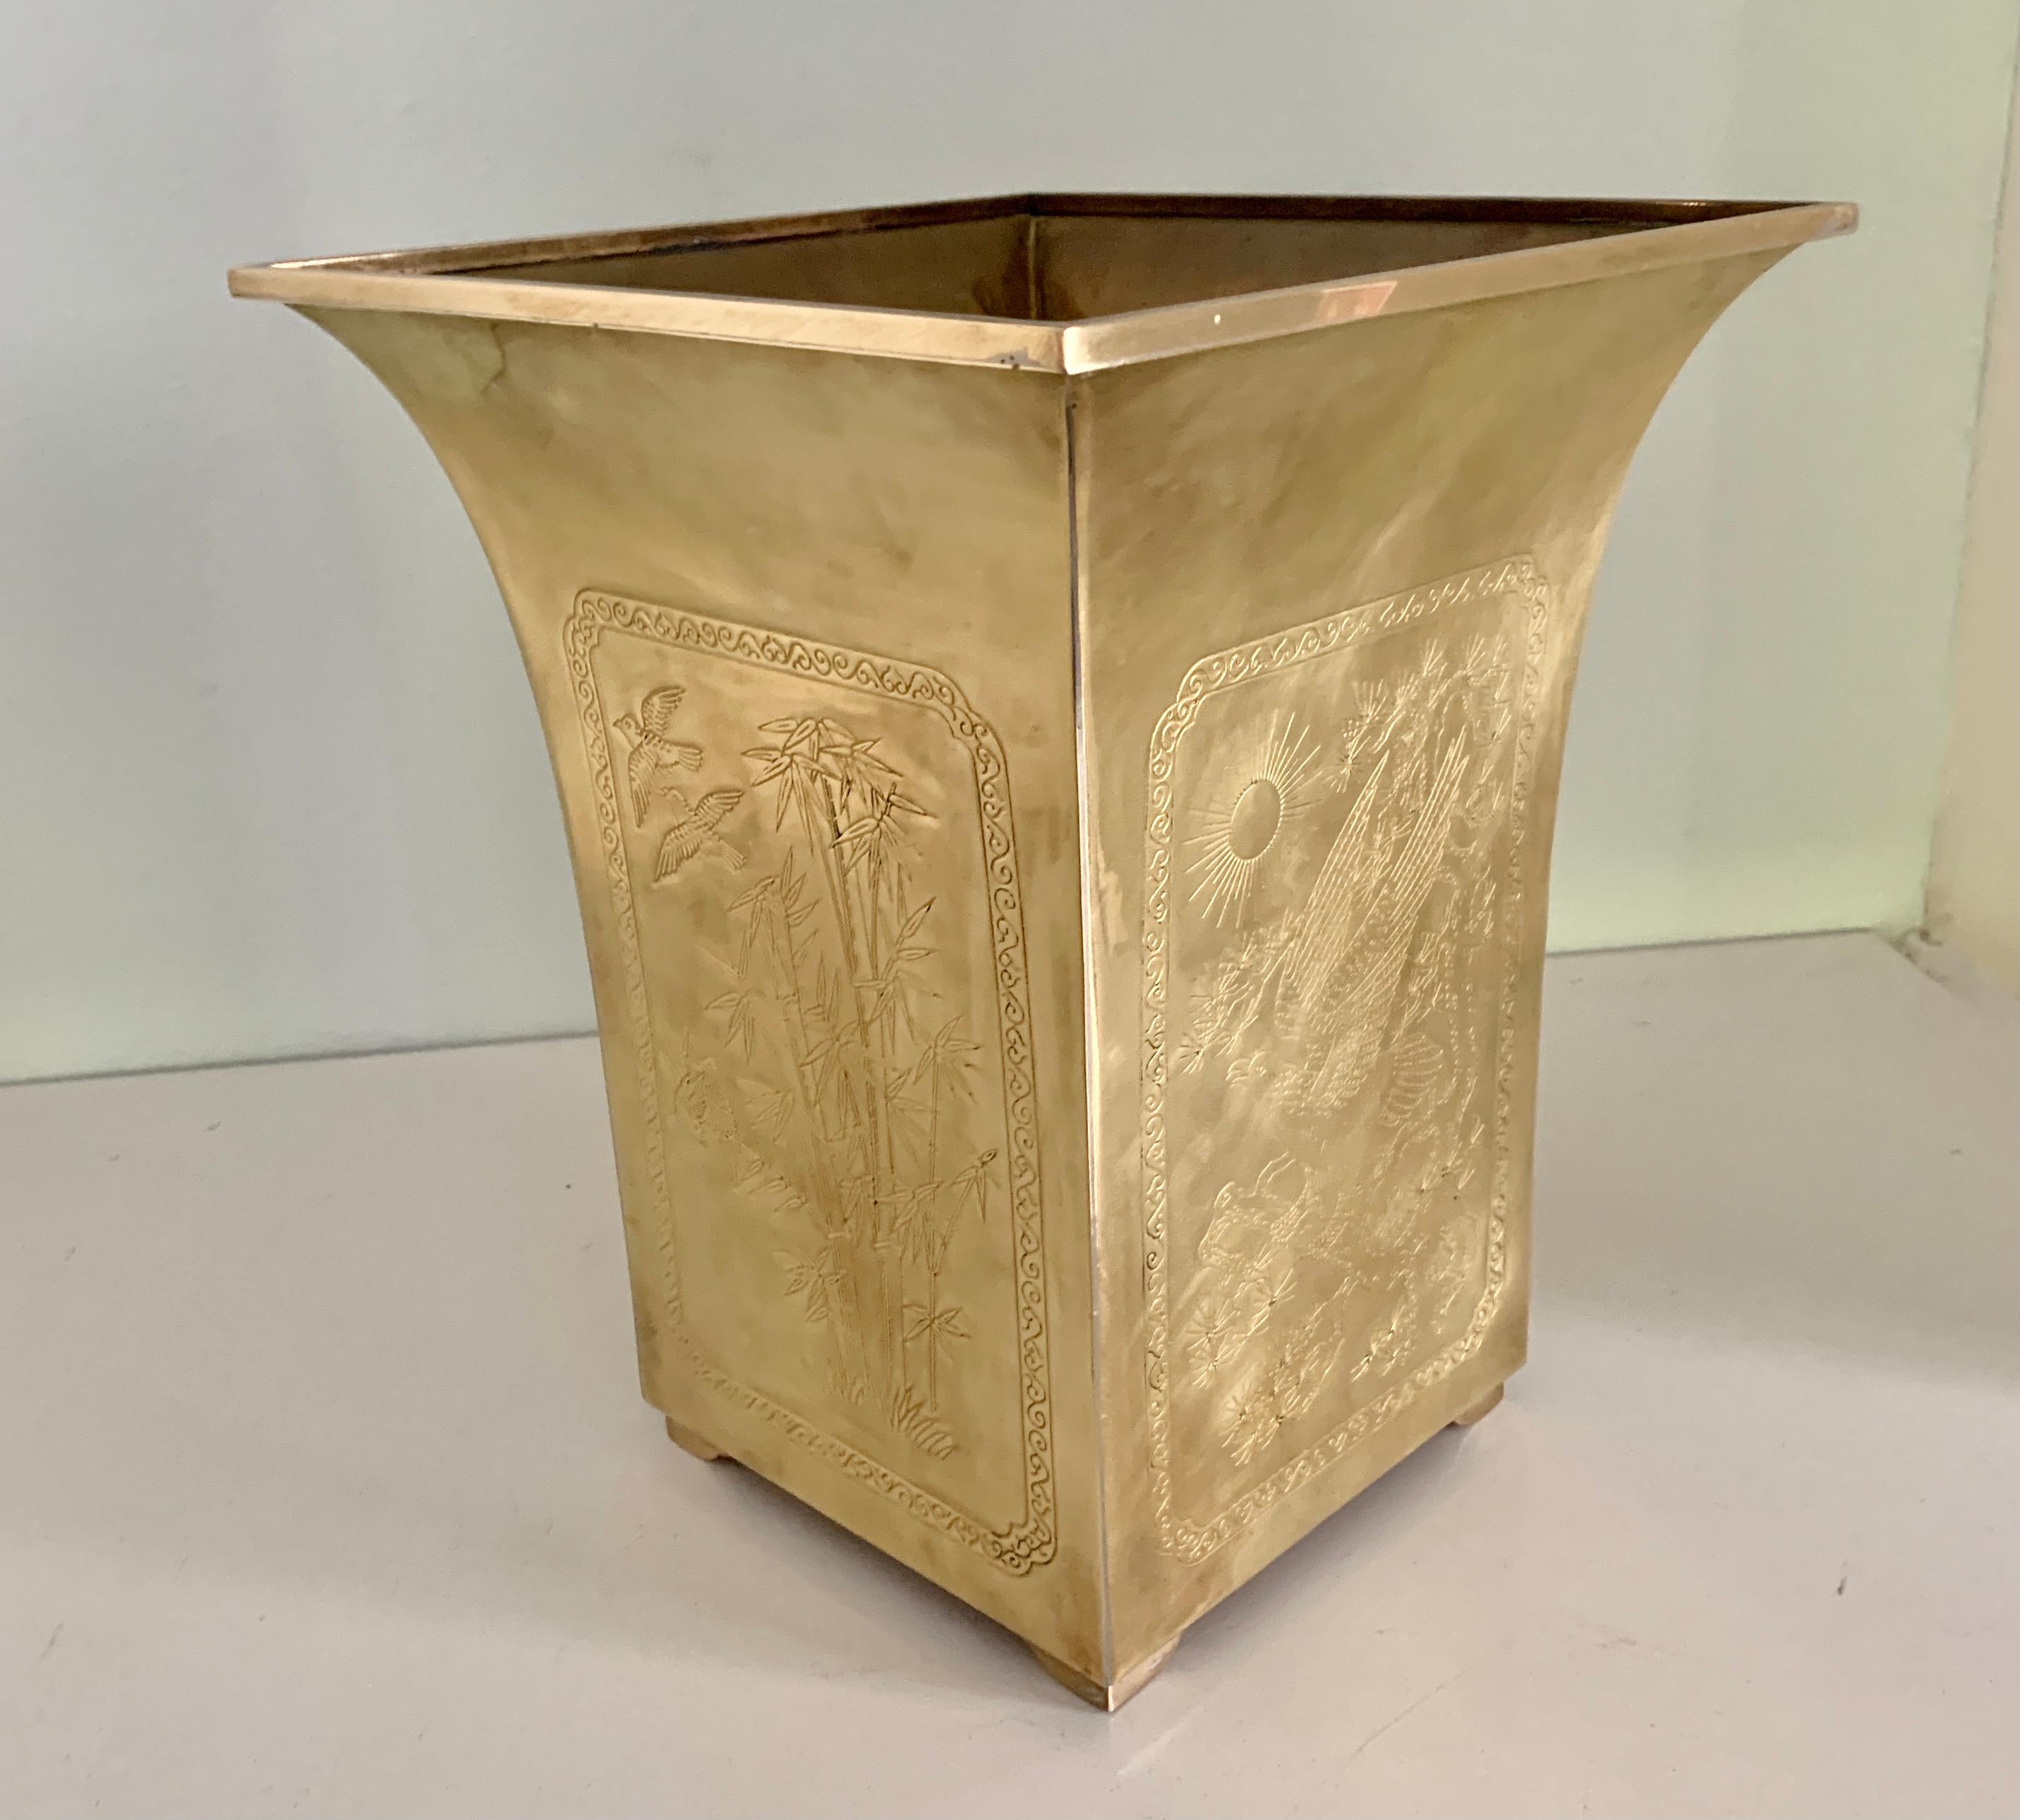 Solid brass square waste can with different Asian depictions of bamboo, birds on all four sides. The can has a graceful curve from the top to the base - very nice design to compliment any room, especially those in the office, bedroom or guest room.